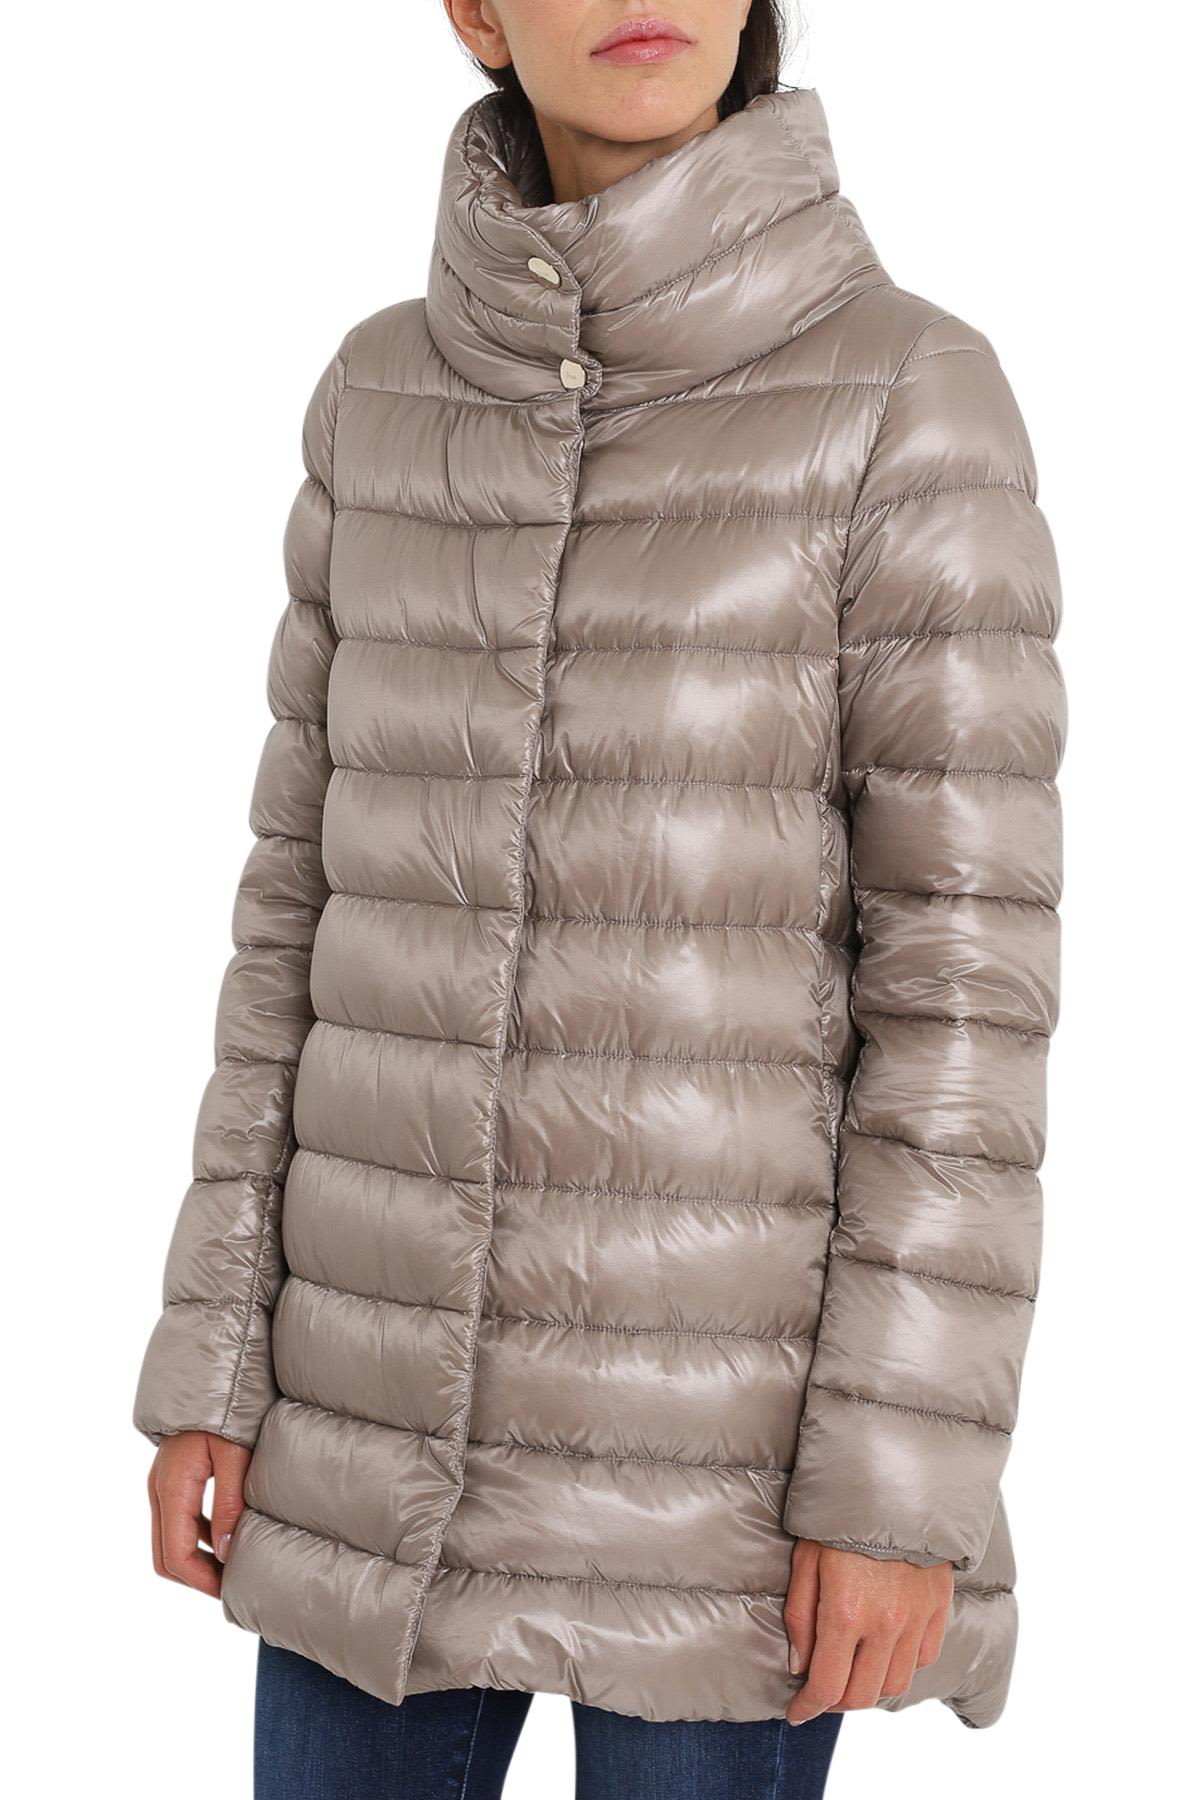 italist | Best price in the market for Herno Herno Amelia Down Jacket ...